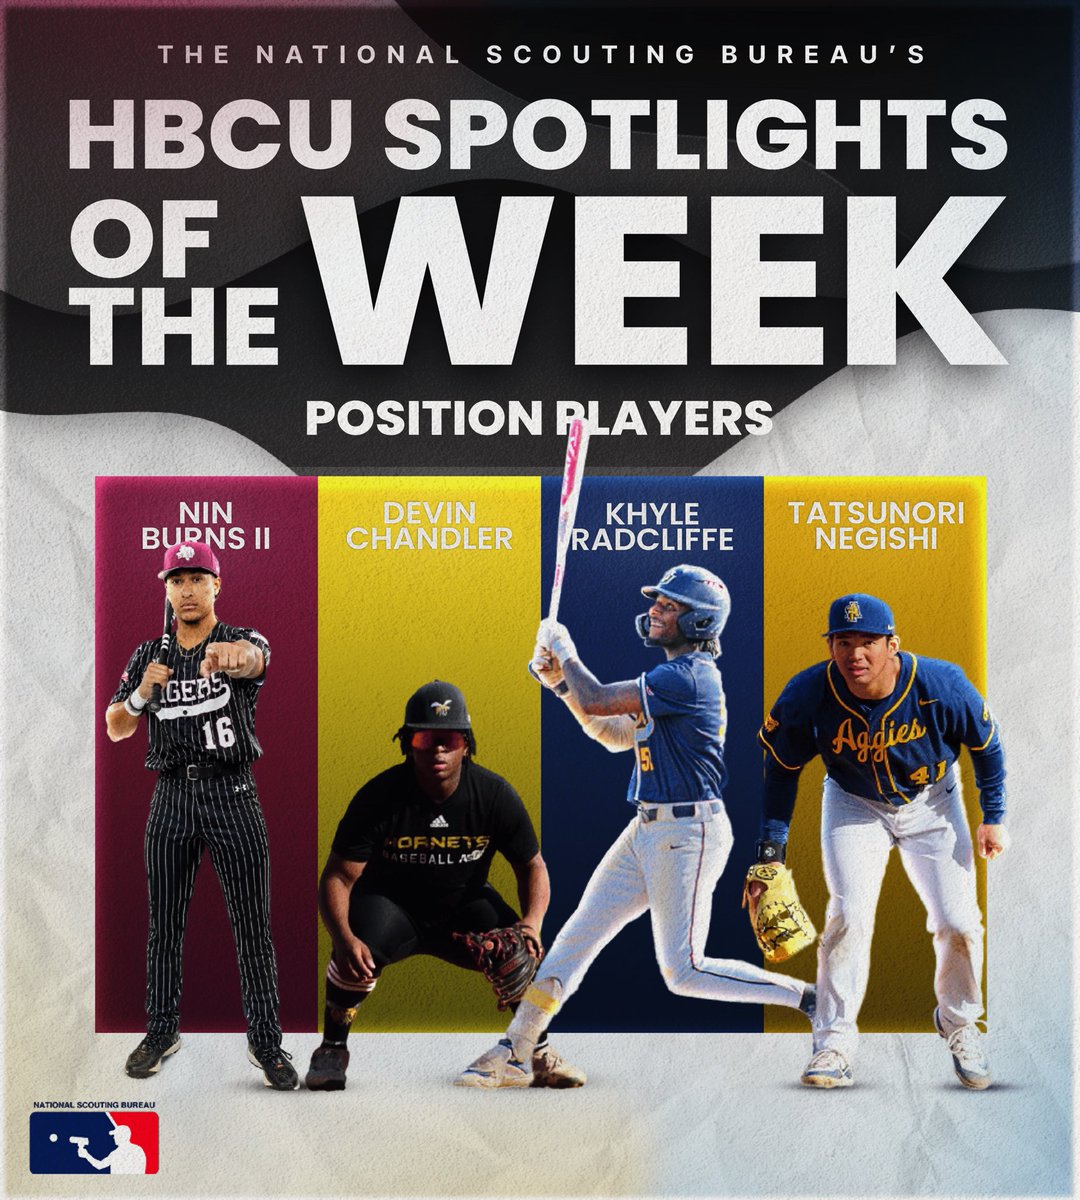 The National Scouting Bureau presents the Position Player Spotlights of the Week‼️ By the Numbers⬇️🔥 Tatsunori Negishi: 5 hits in the series finale at CofC 🐾 Khyle Radcliffe: 11 for 15 10RBIS 5SB 2dbls 1 triple 1BB 🐆 Devin Chandler: 7 for 12 7 RBIS 1 HR 2 dbls 🐝 Nin